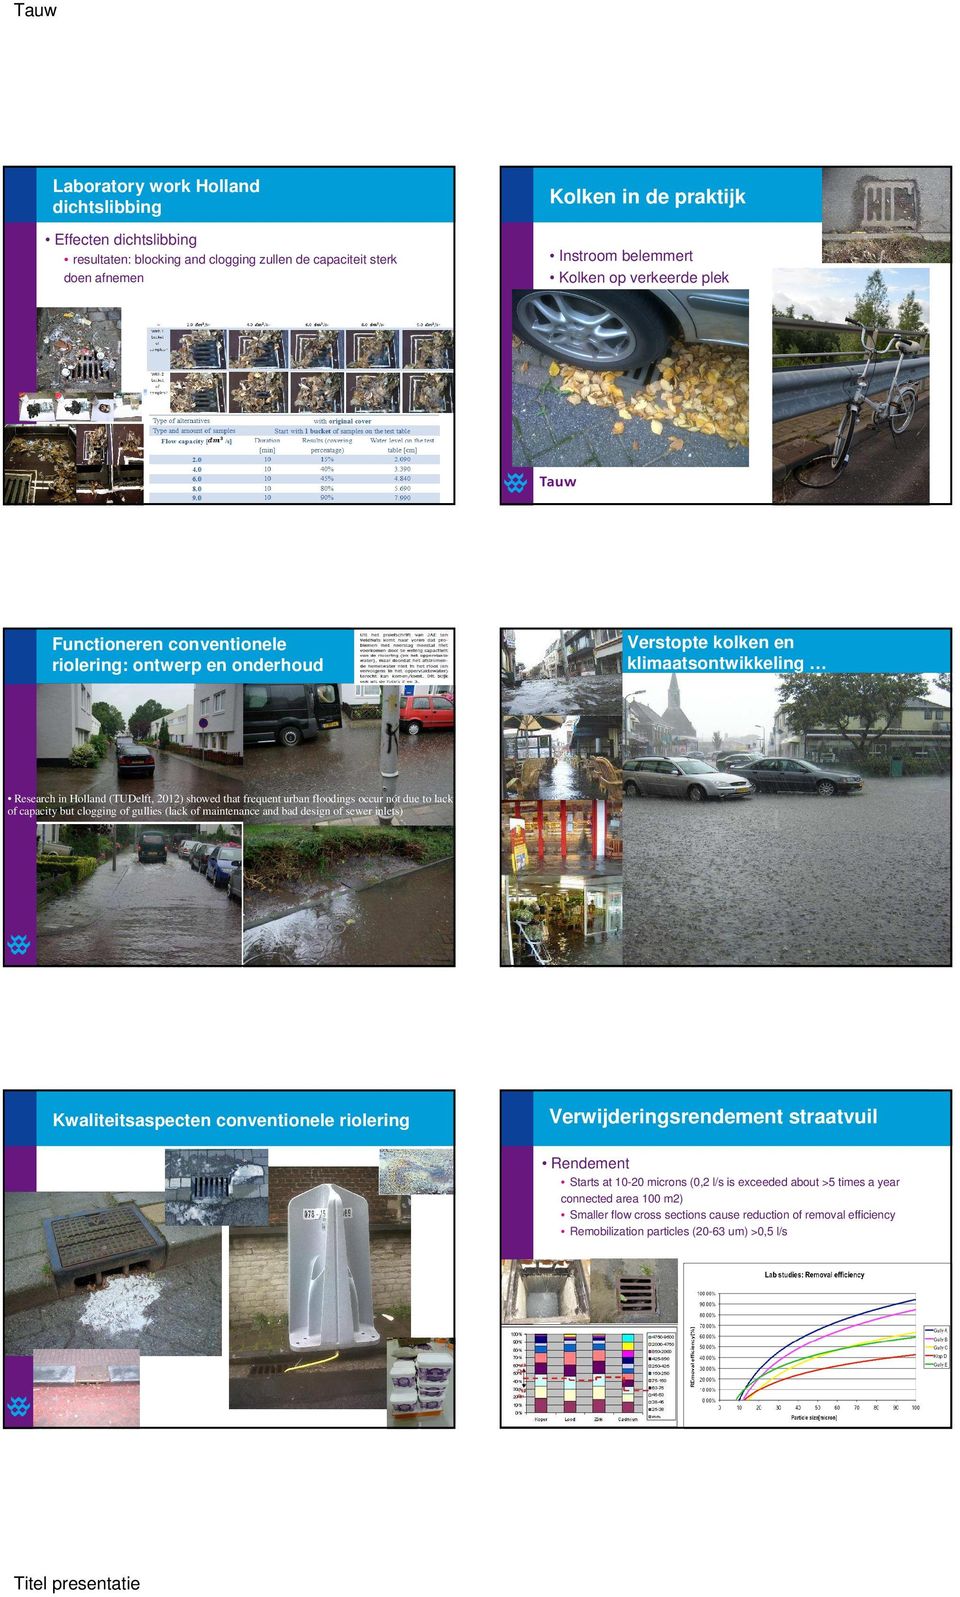 occur not due to lack of capacity but clogging of gullies (lack of maintenance and bad design of sewer inlets) Kwaliteitsaspecten conventionele riolering Verwijderingsrendement straatvuil